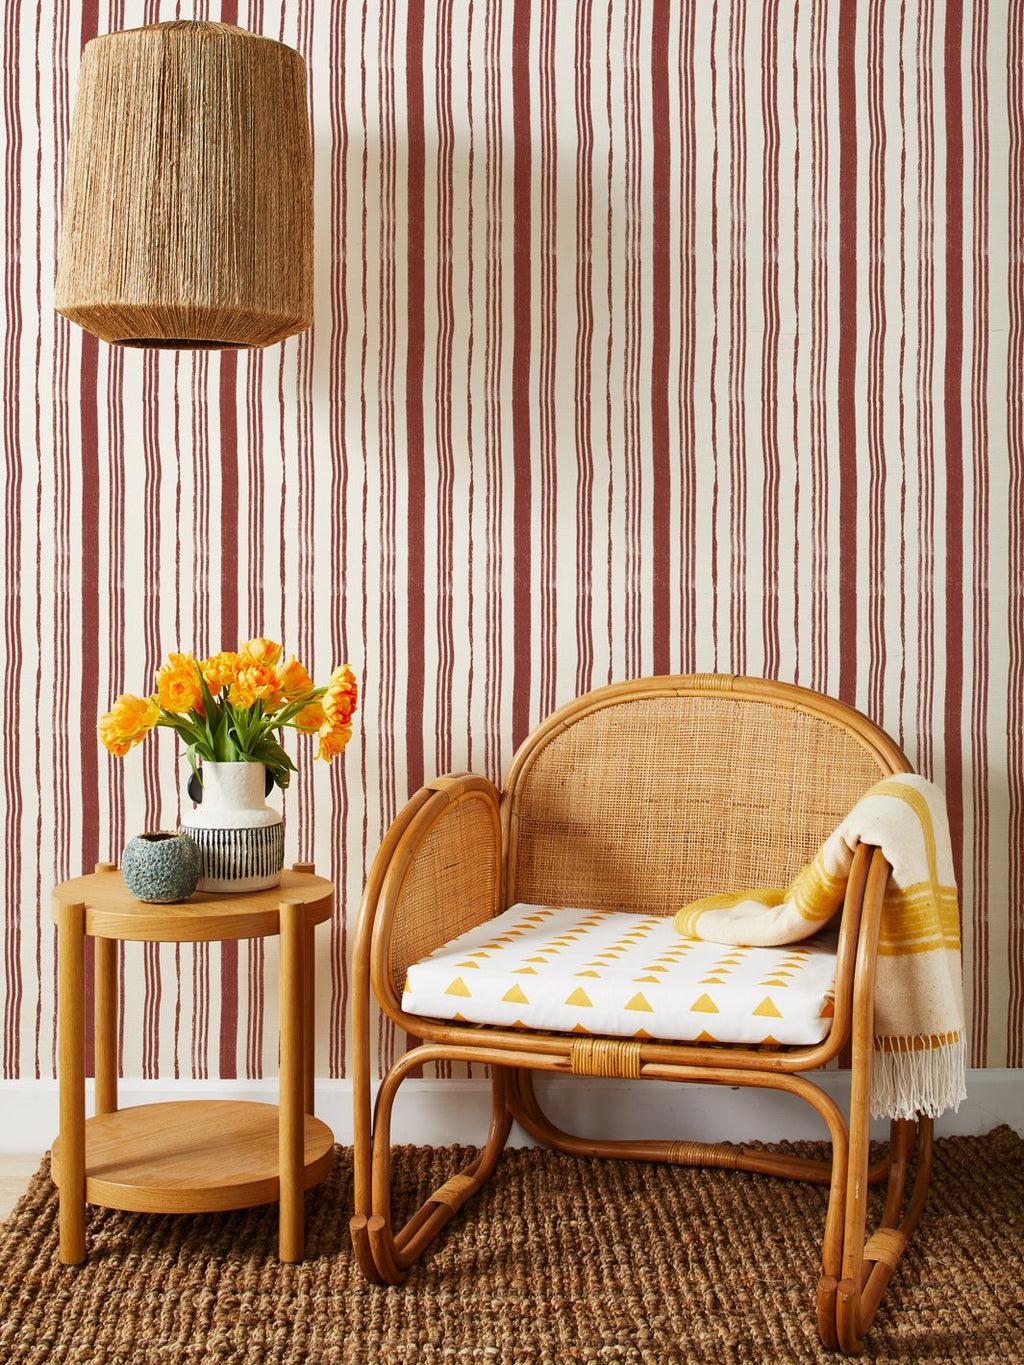 Painted Stripes' Grasscloth Wallpaper by Nathan Turner - Rust